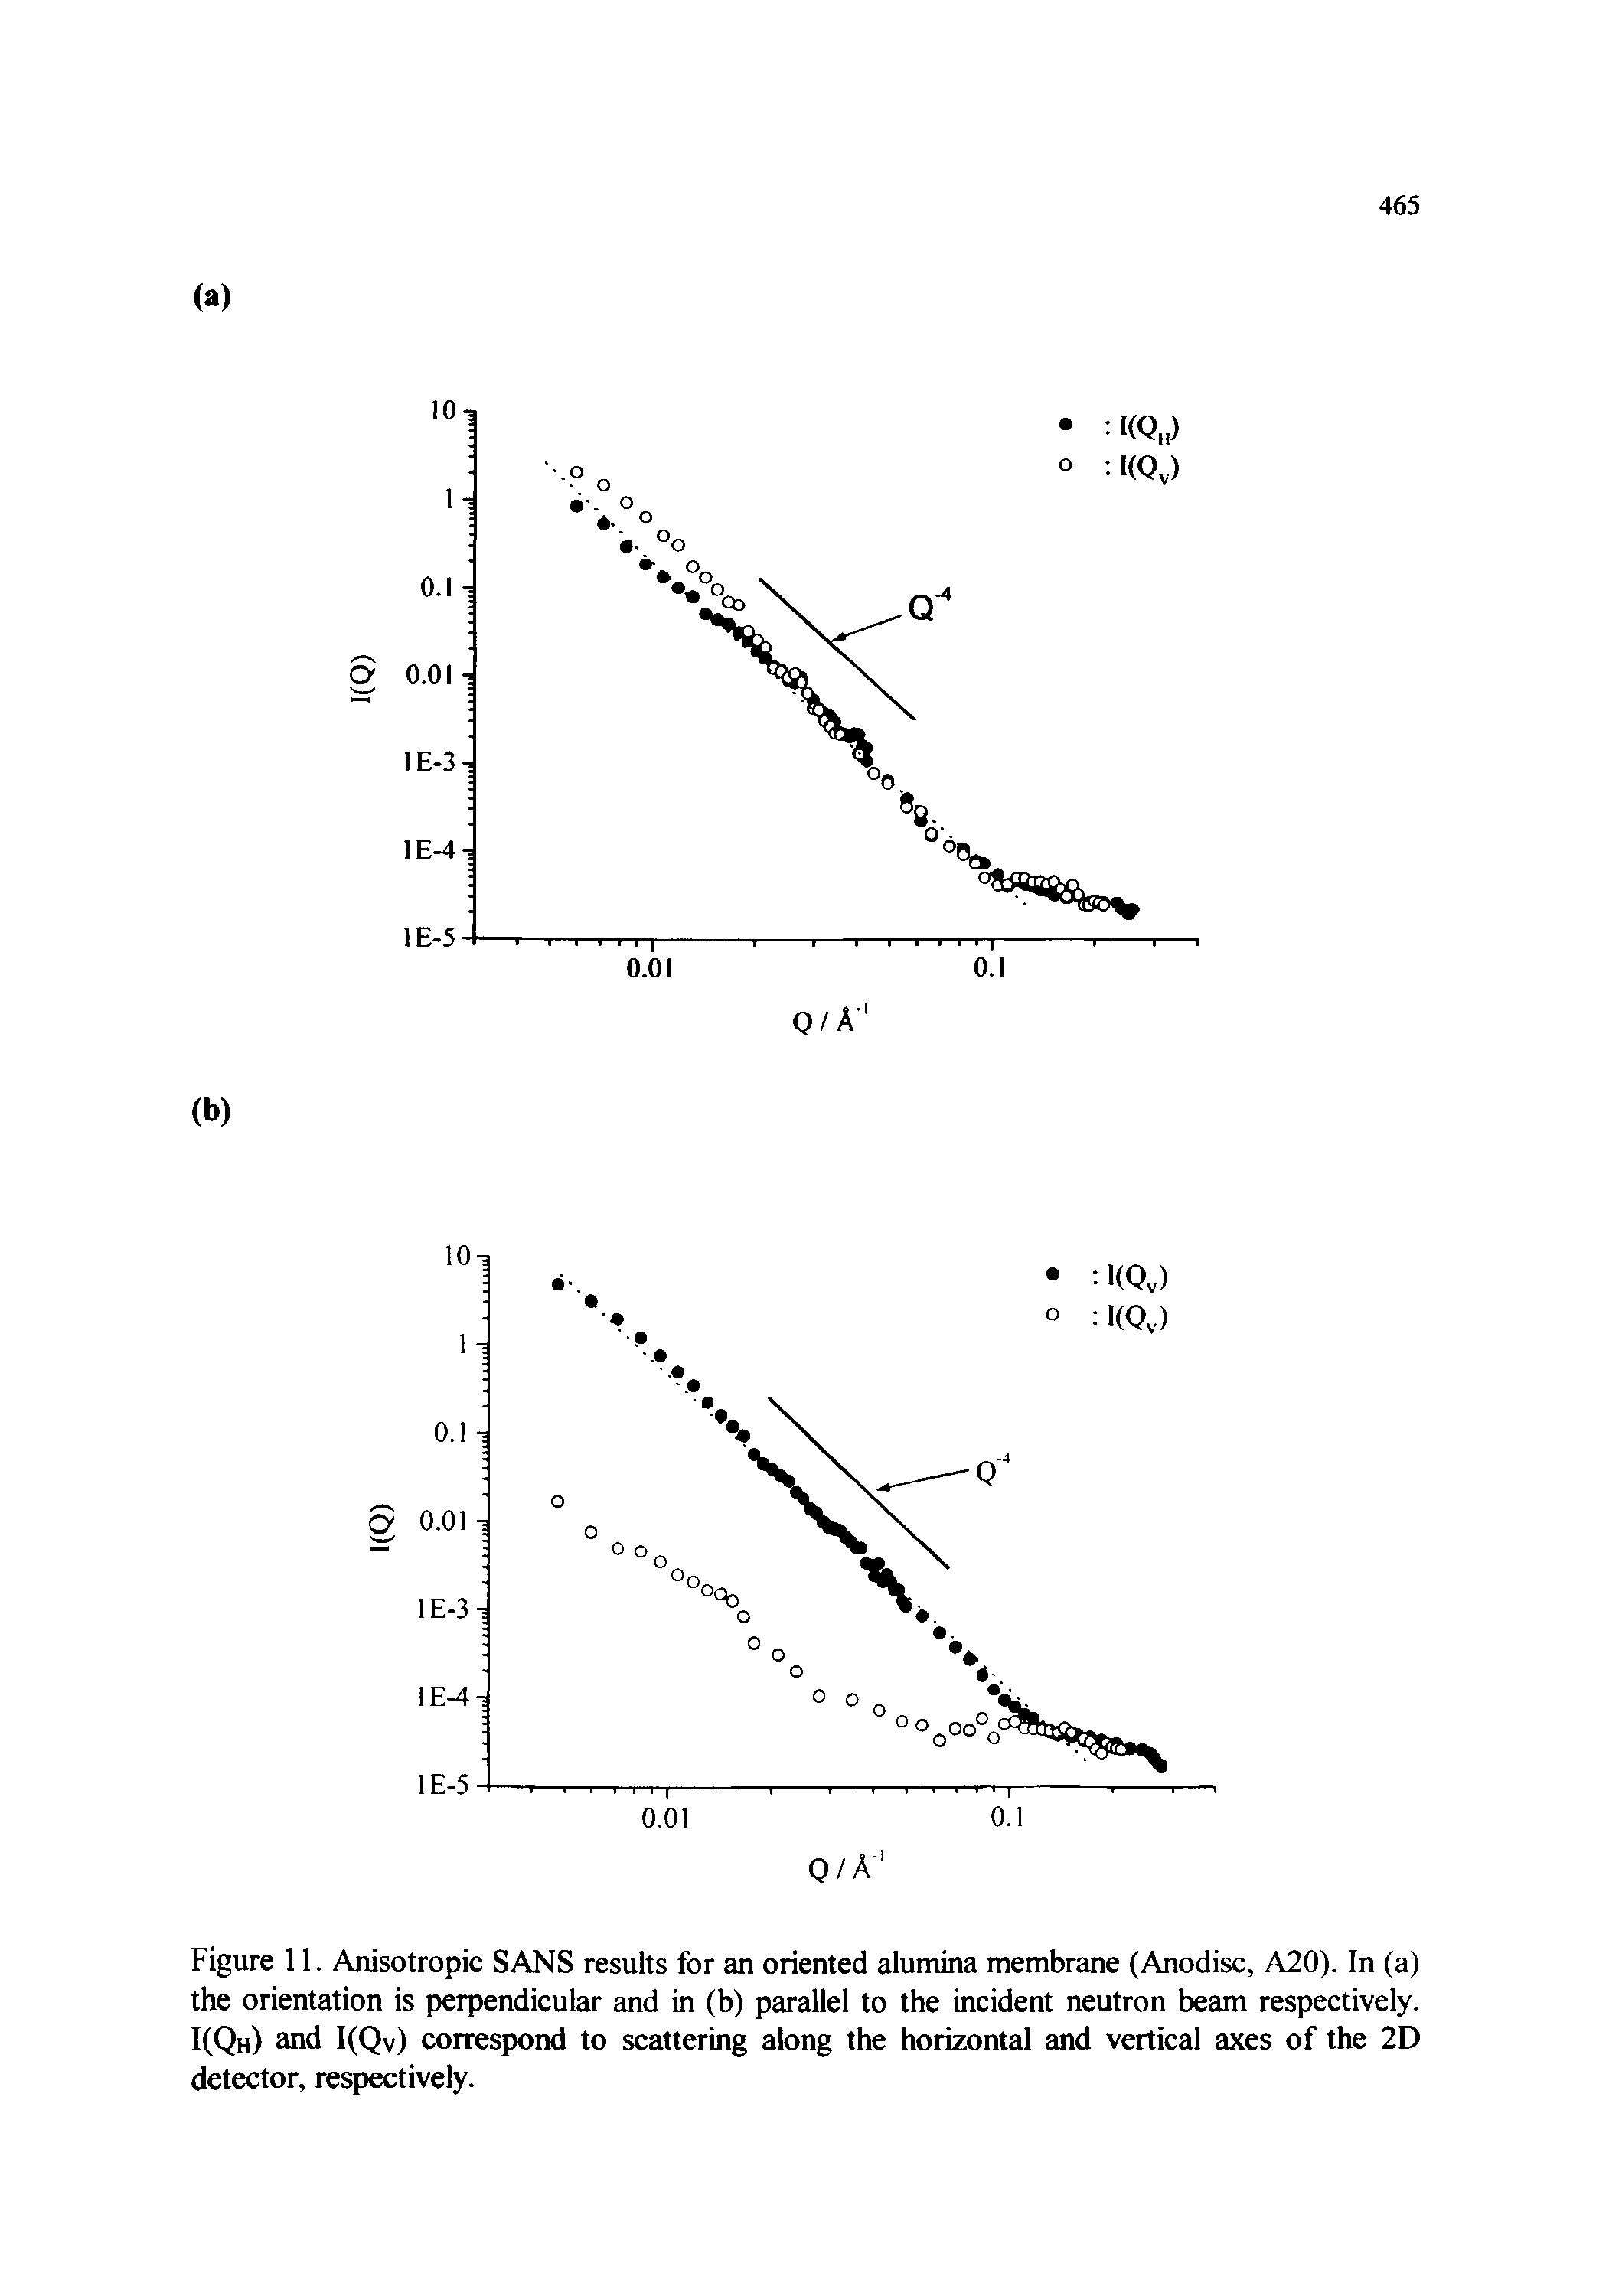 Figure 11. Anisotropic SANS results for an oriented alumina membrane (Anodise, A20). In (a) the orientation is perpendicular and in (b) parallel to the incident neutron beam respectively. I(Qh) and I(Qv) correspond to scattering along the horizontal and vertical axes of the 2D detector, respectively.